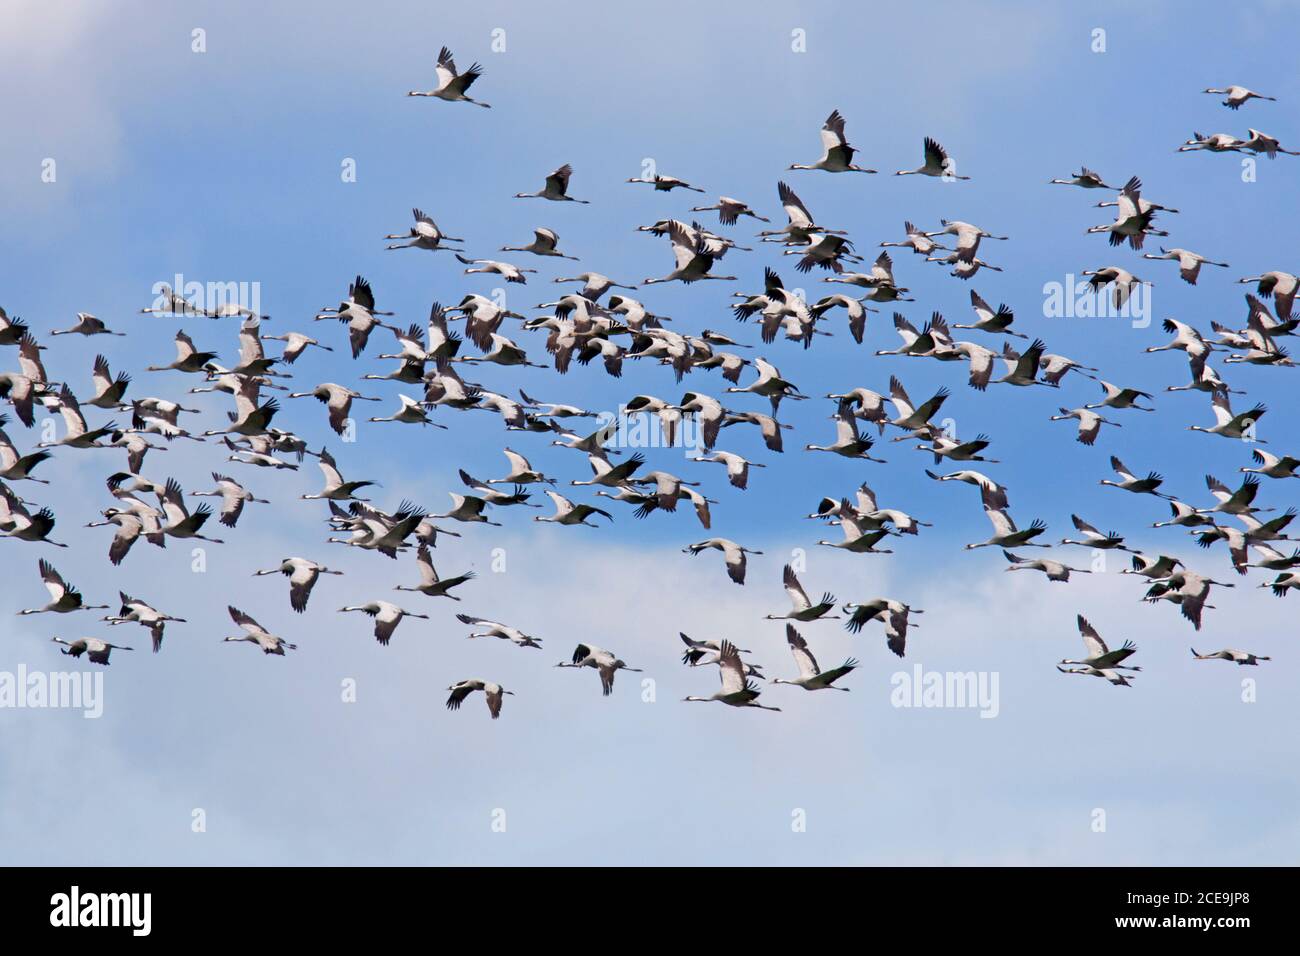 Migrating flock of common cranes / Eurasian crane (Grus grus) flying against blue sky during migration in autumn / fall Stock Photo